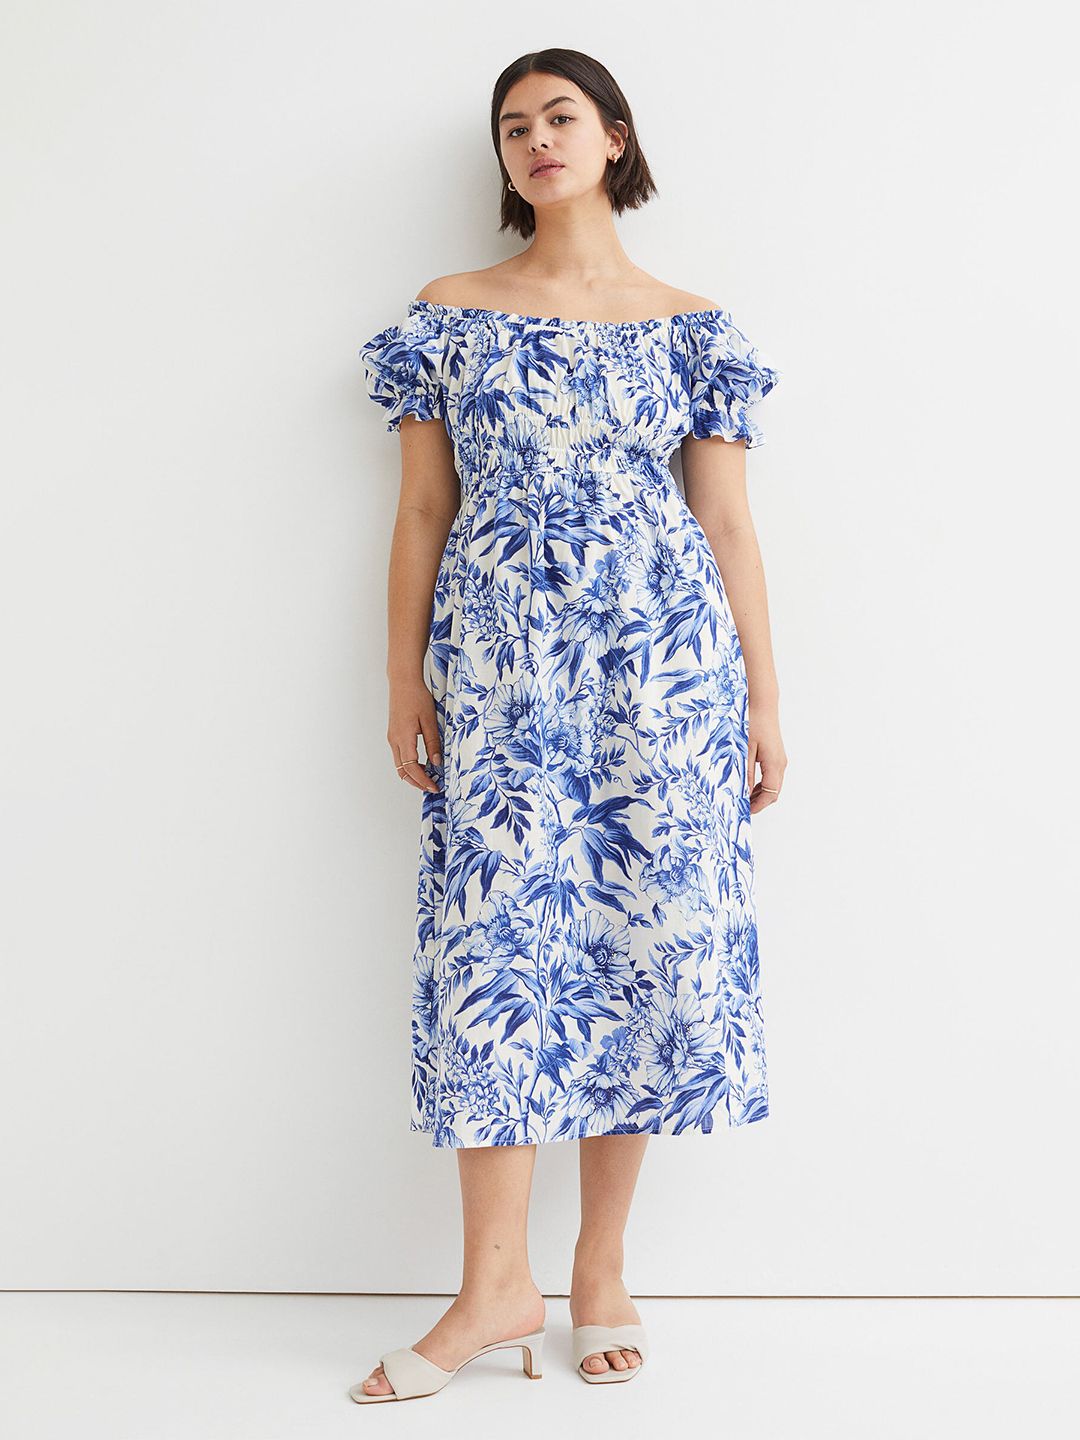 H&M Women Blue & White Off-The-Shoulder Cotton Dress Price in India